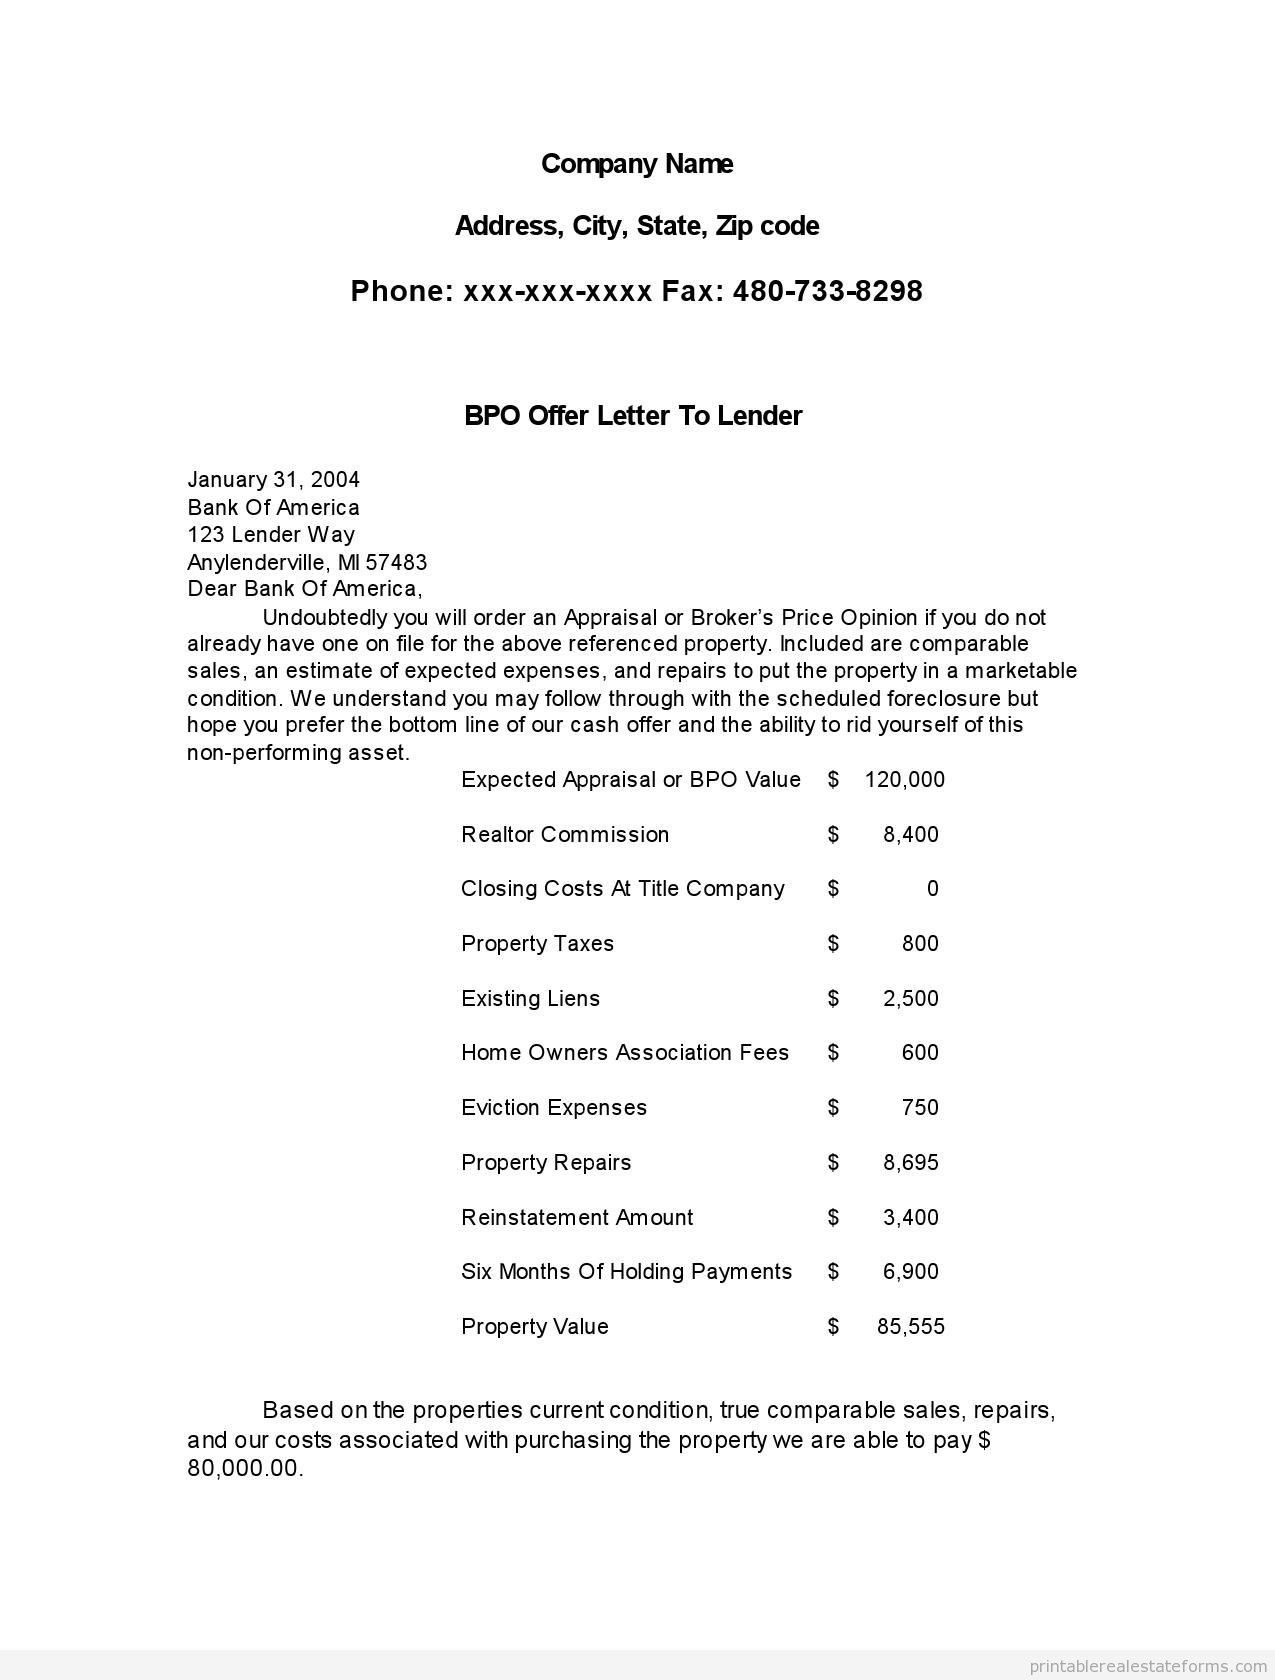 Foreclosure Letter Template - Printable Bpo Letter to Bank Template 2015